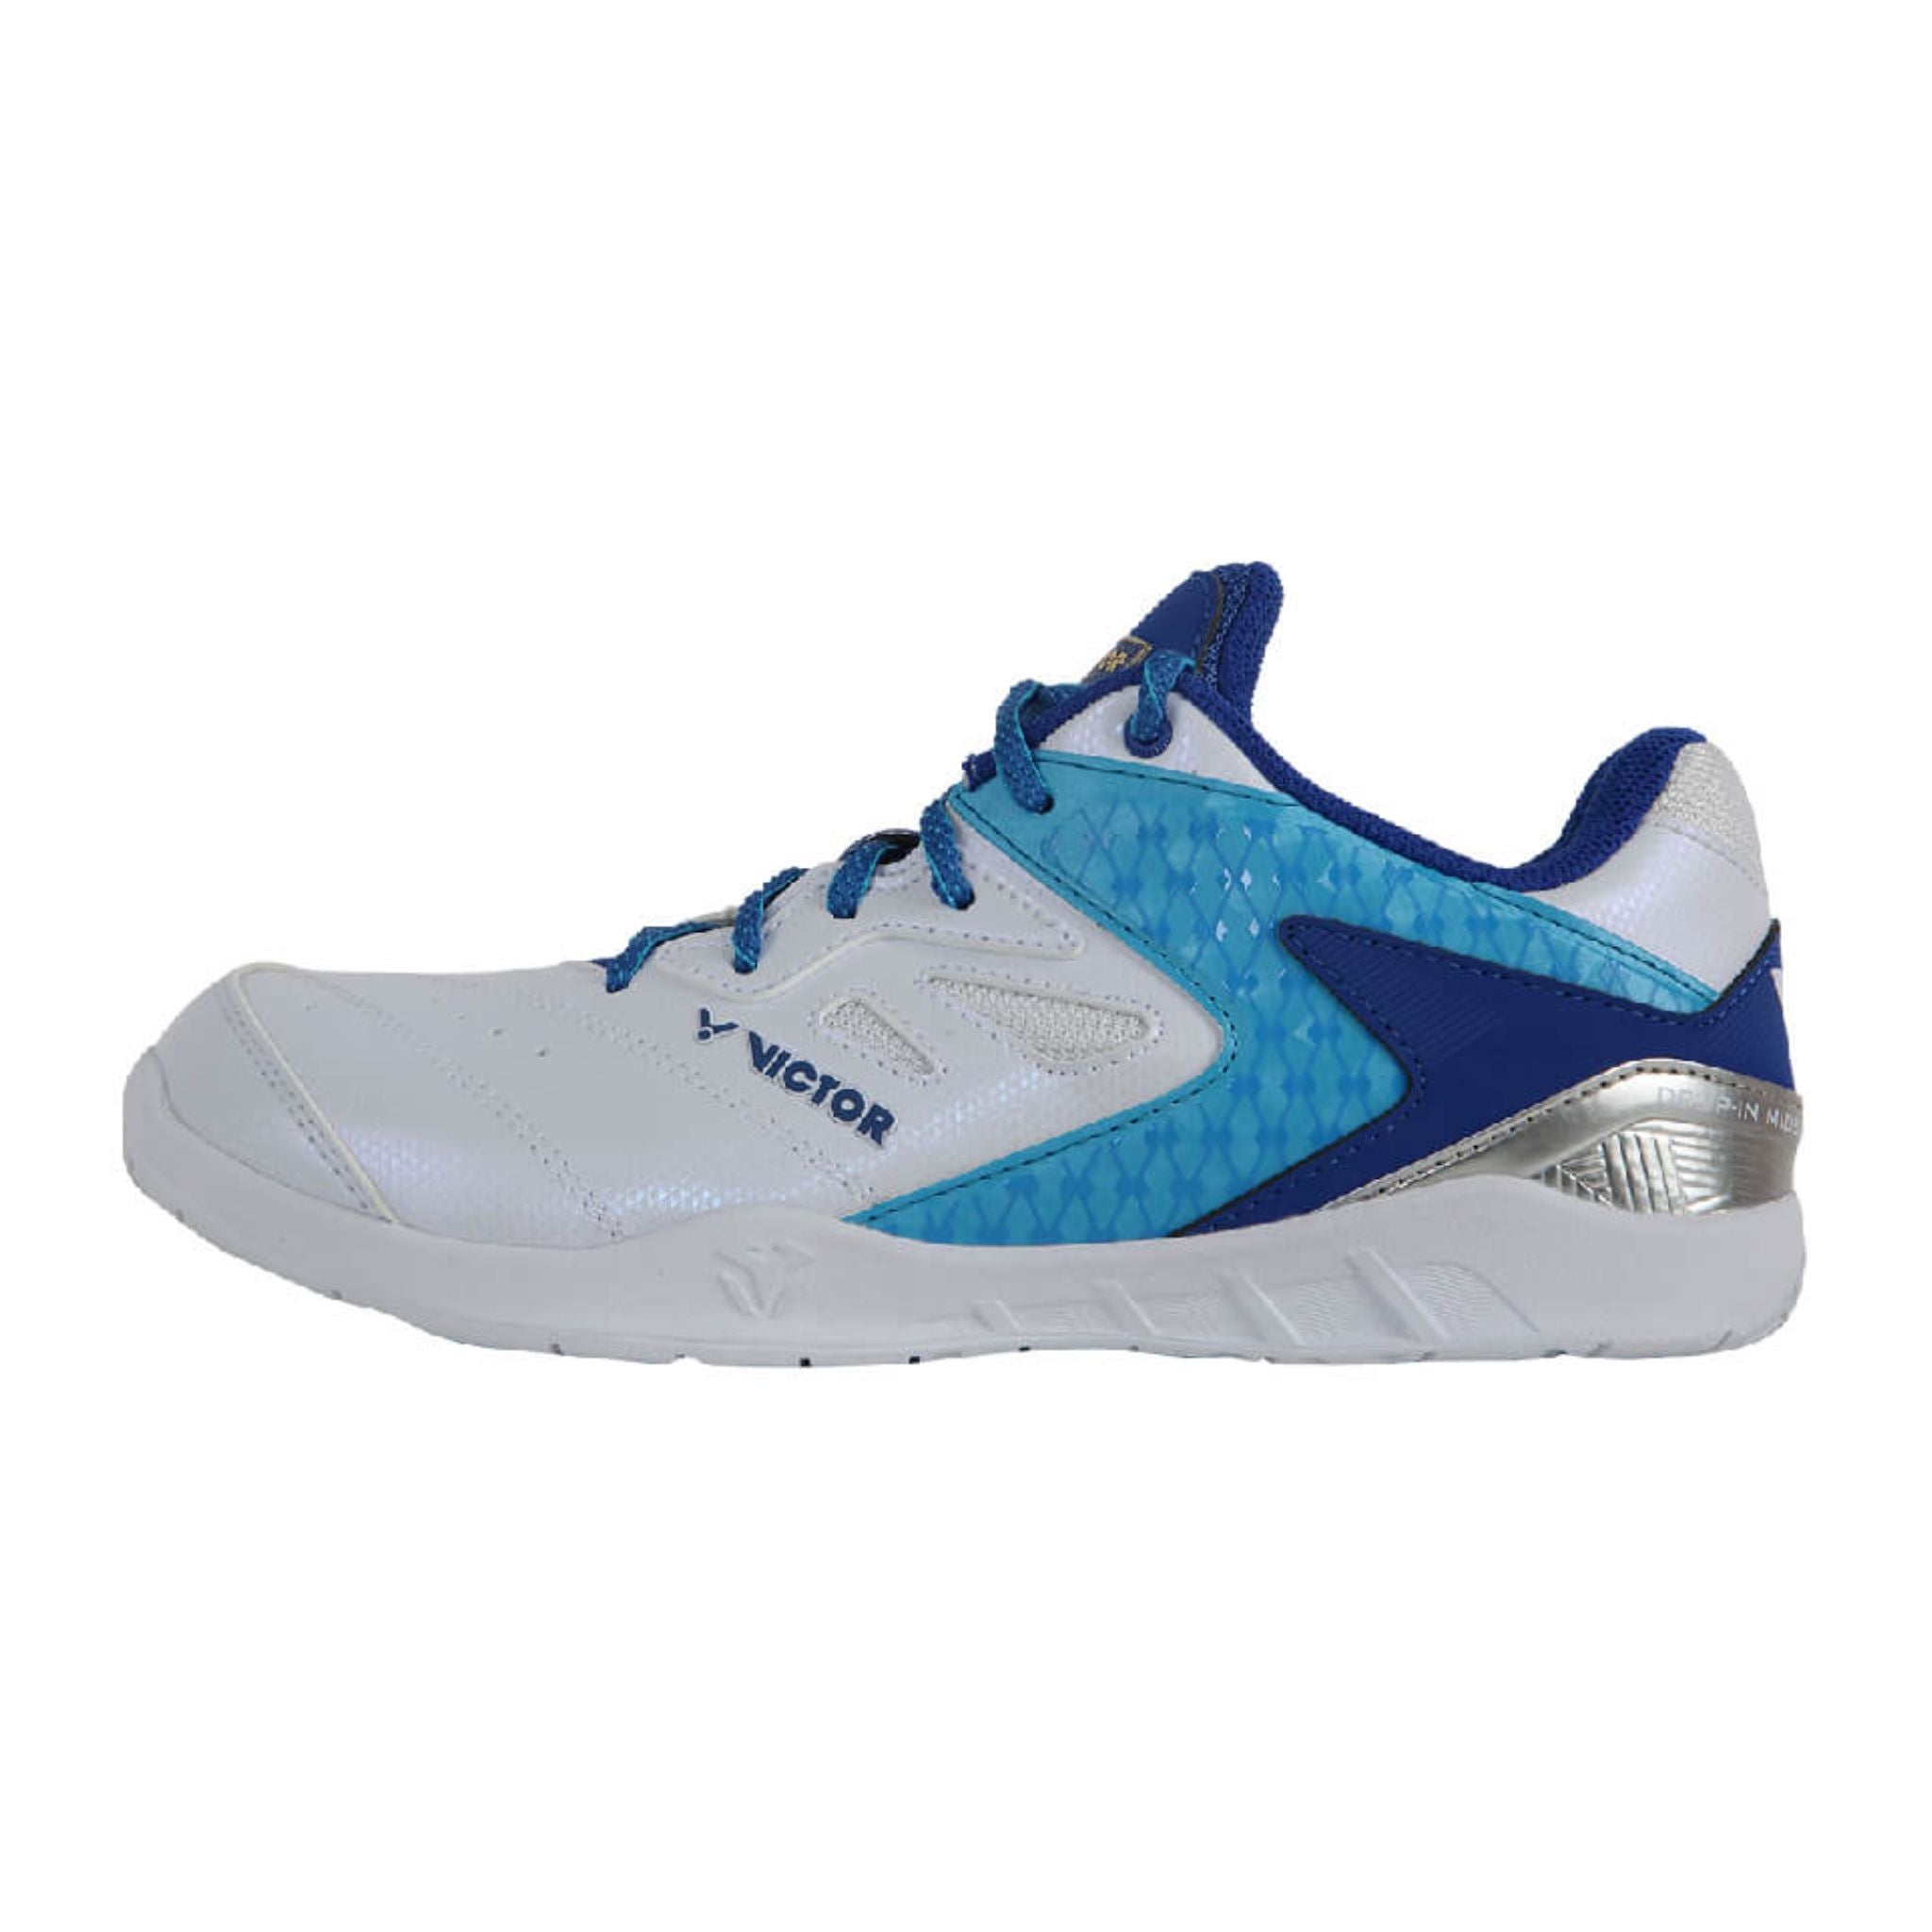 Victor 55th Anniversary Badminton Shoes [White/Blue] P9200IIITD-55 AF